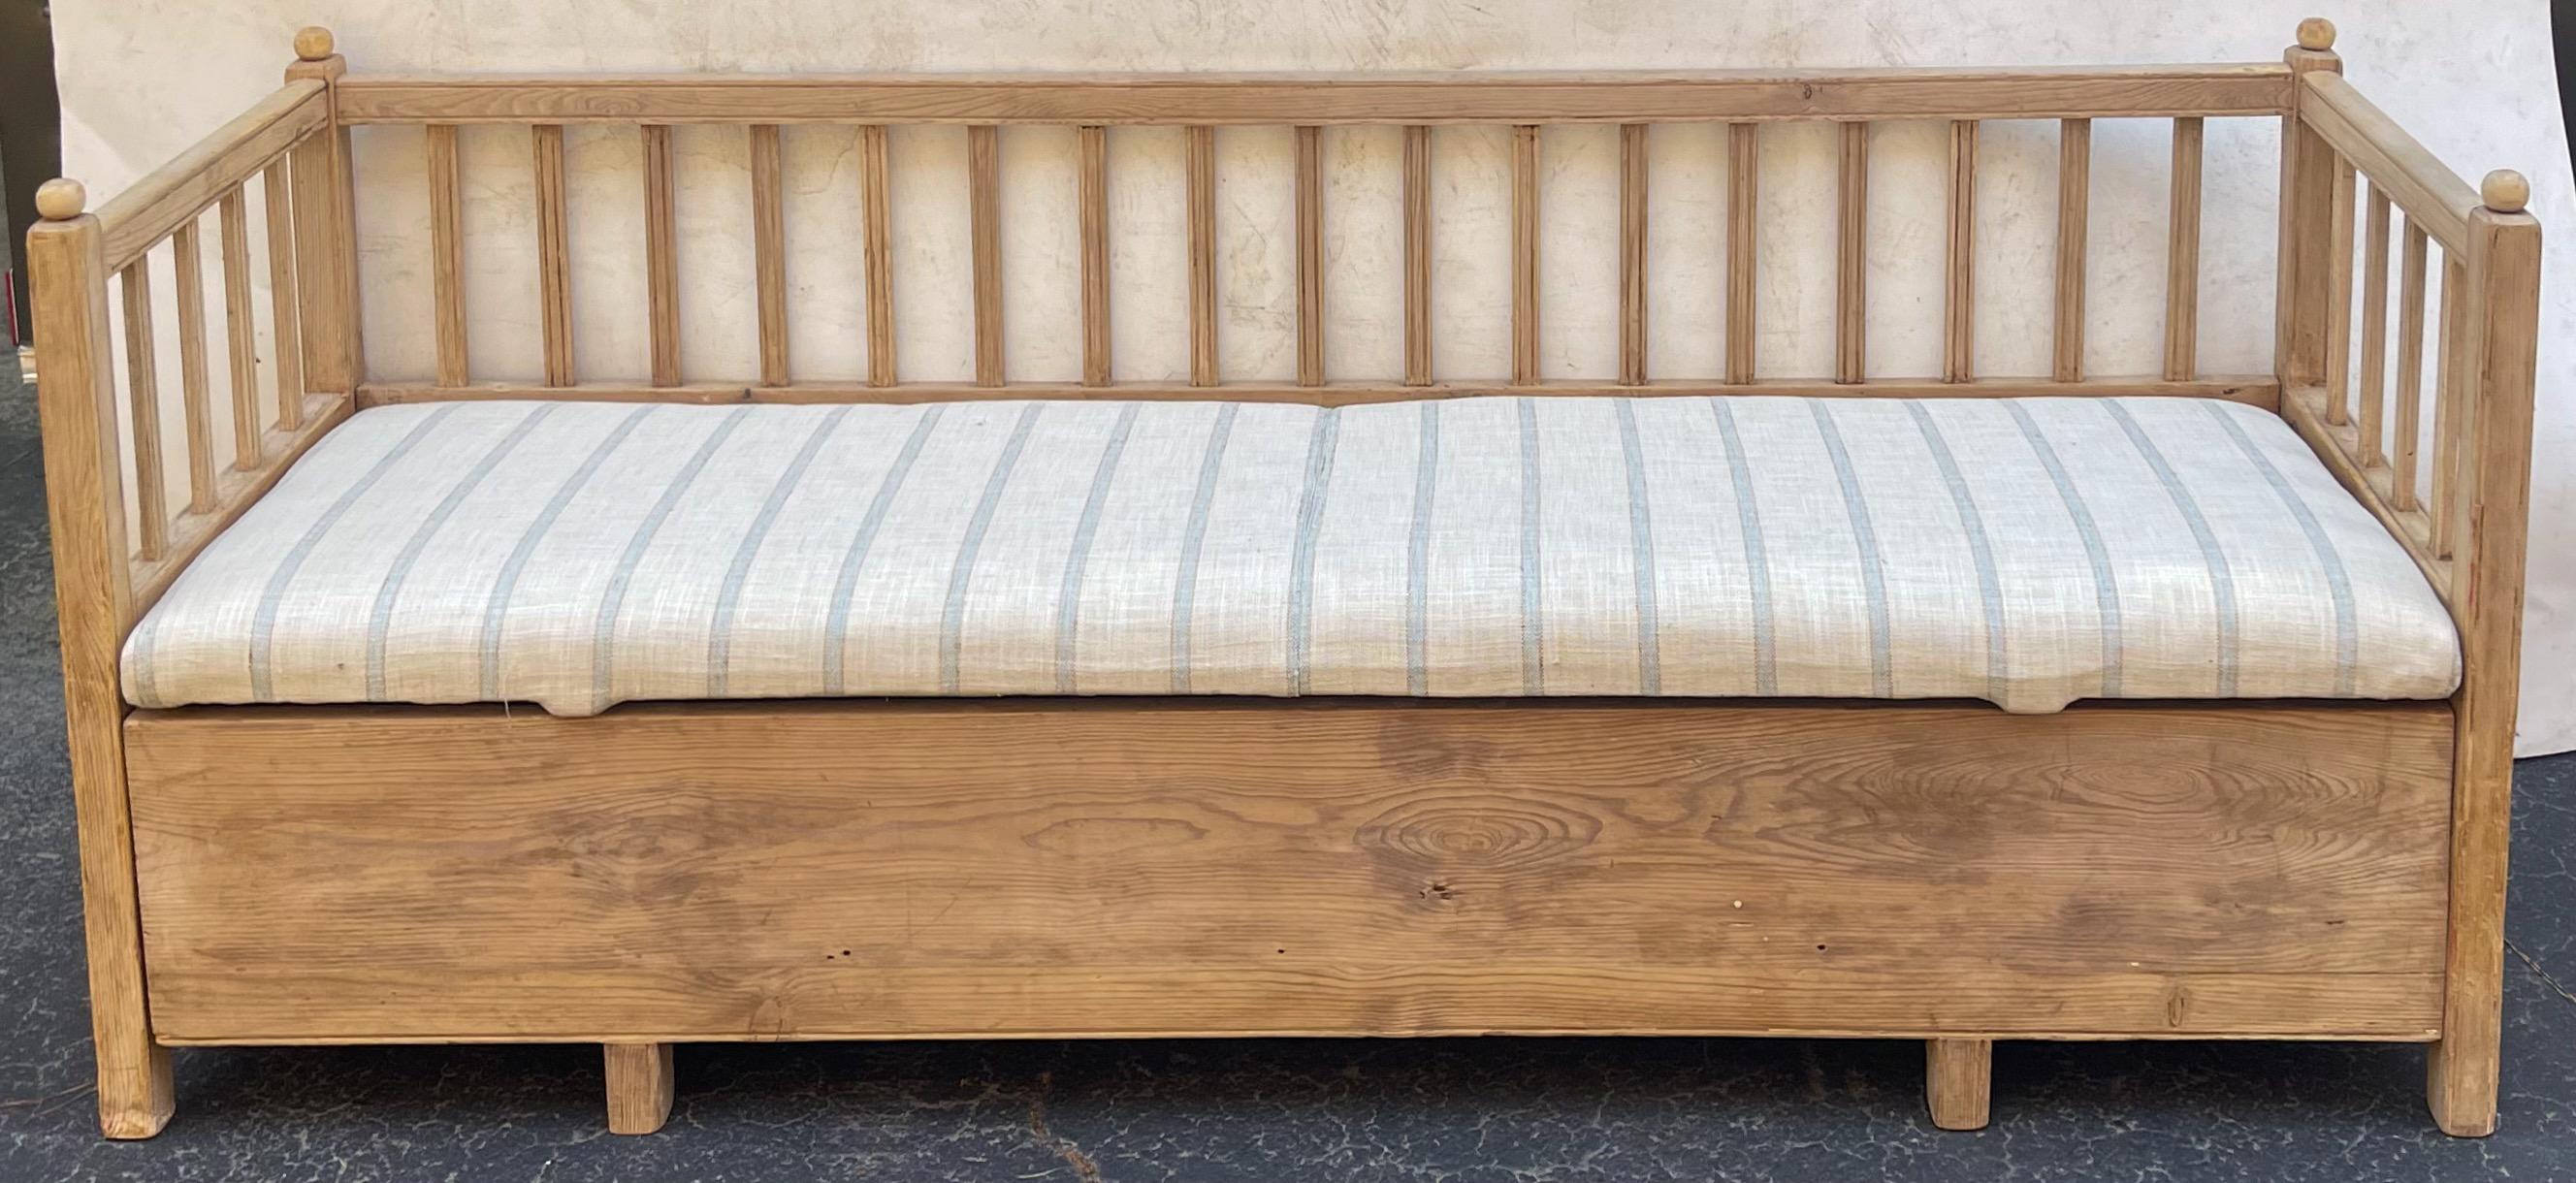 This is a timeless piece! It is a late 19th century Swedish pine bench in a new blue and white linen. The cushion is a simgle removable piece. The base is also a separate piece. The slat back and frame are structurally sound.